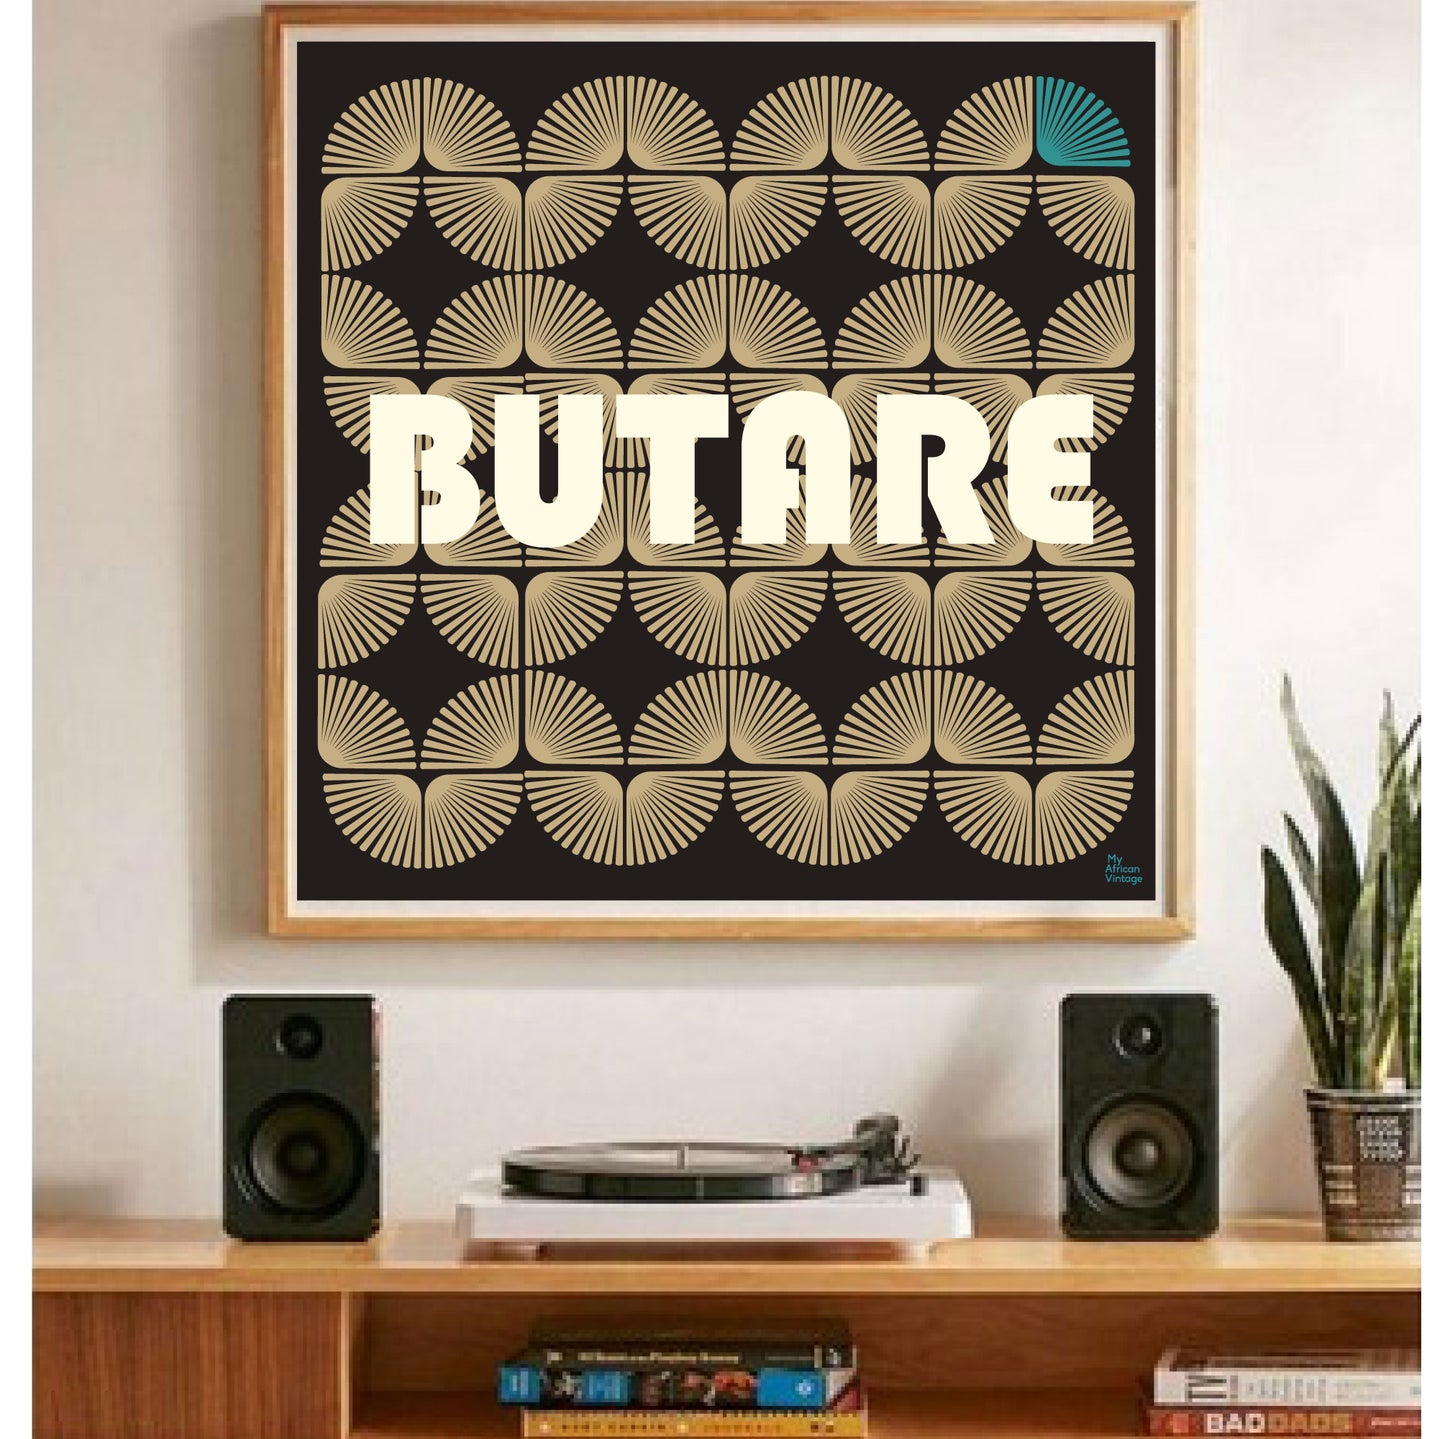 "Butare" retro style poster  - "My African Vintage" collection 